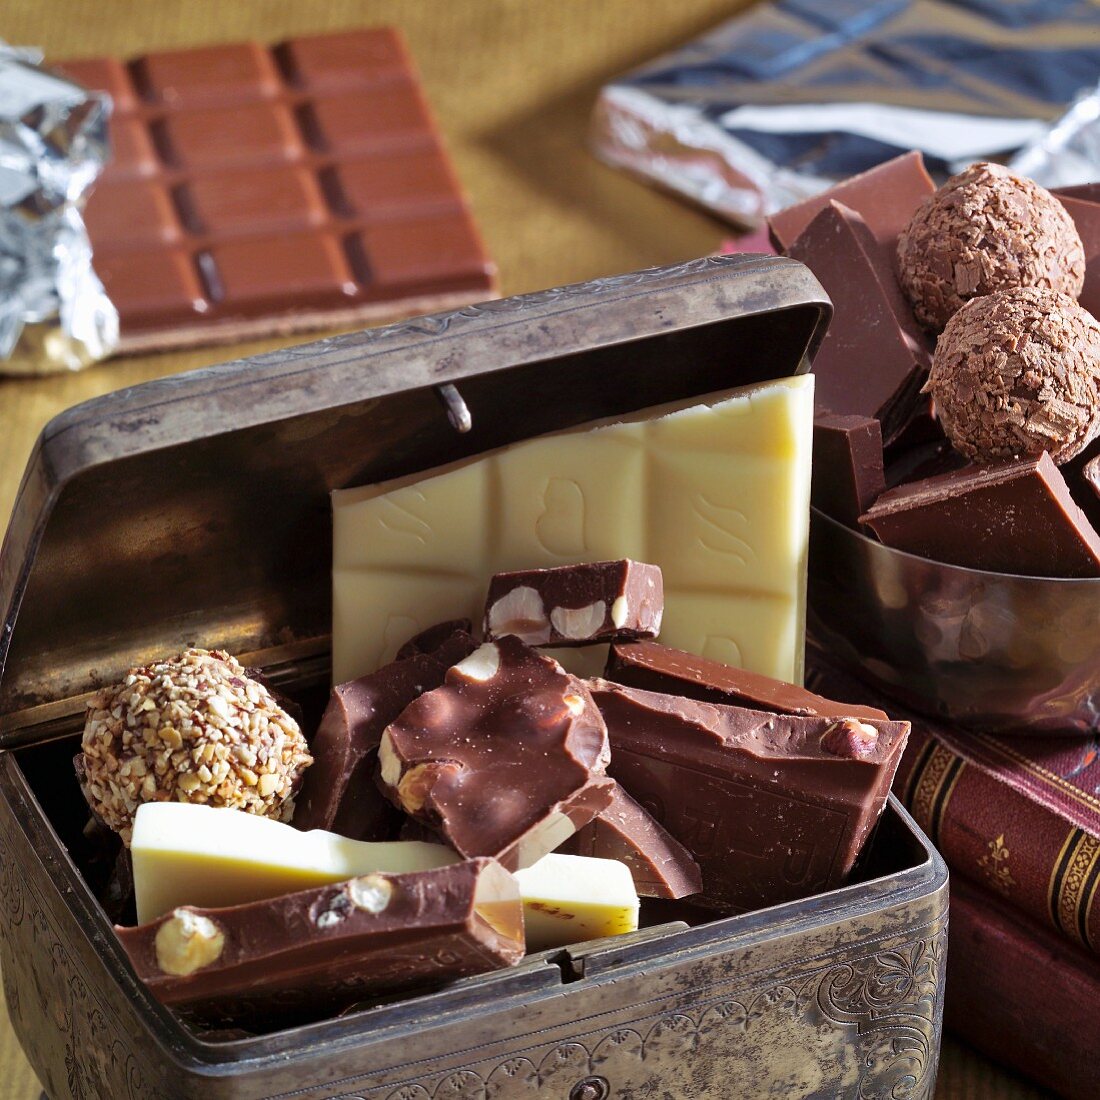 Pieces of chocolate and chocolates in a metal box